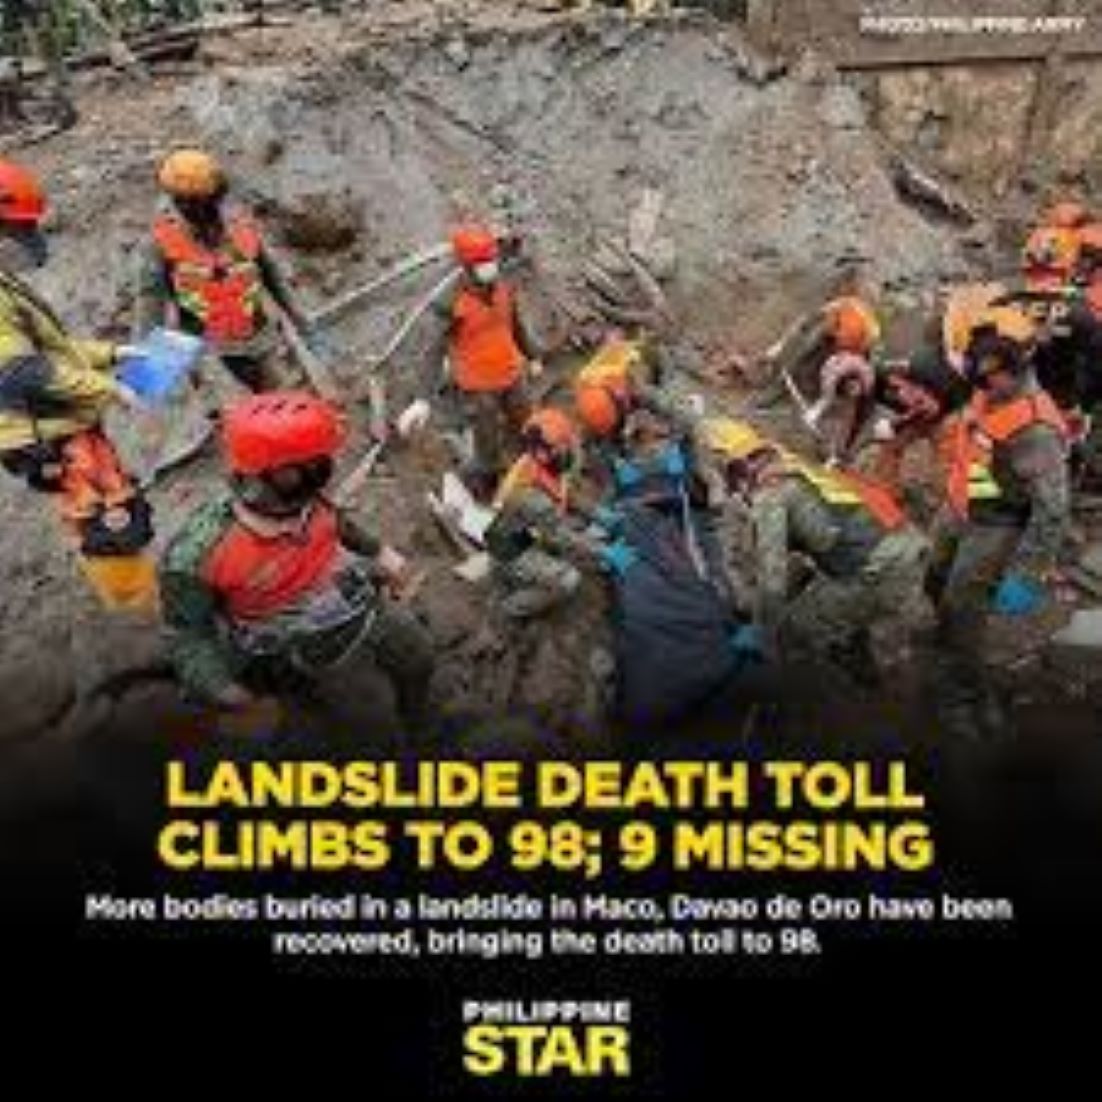 Landslide Death Toll Climbs To 98 In Philippines